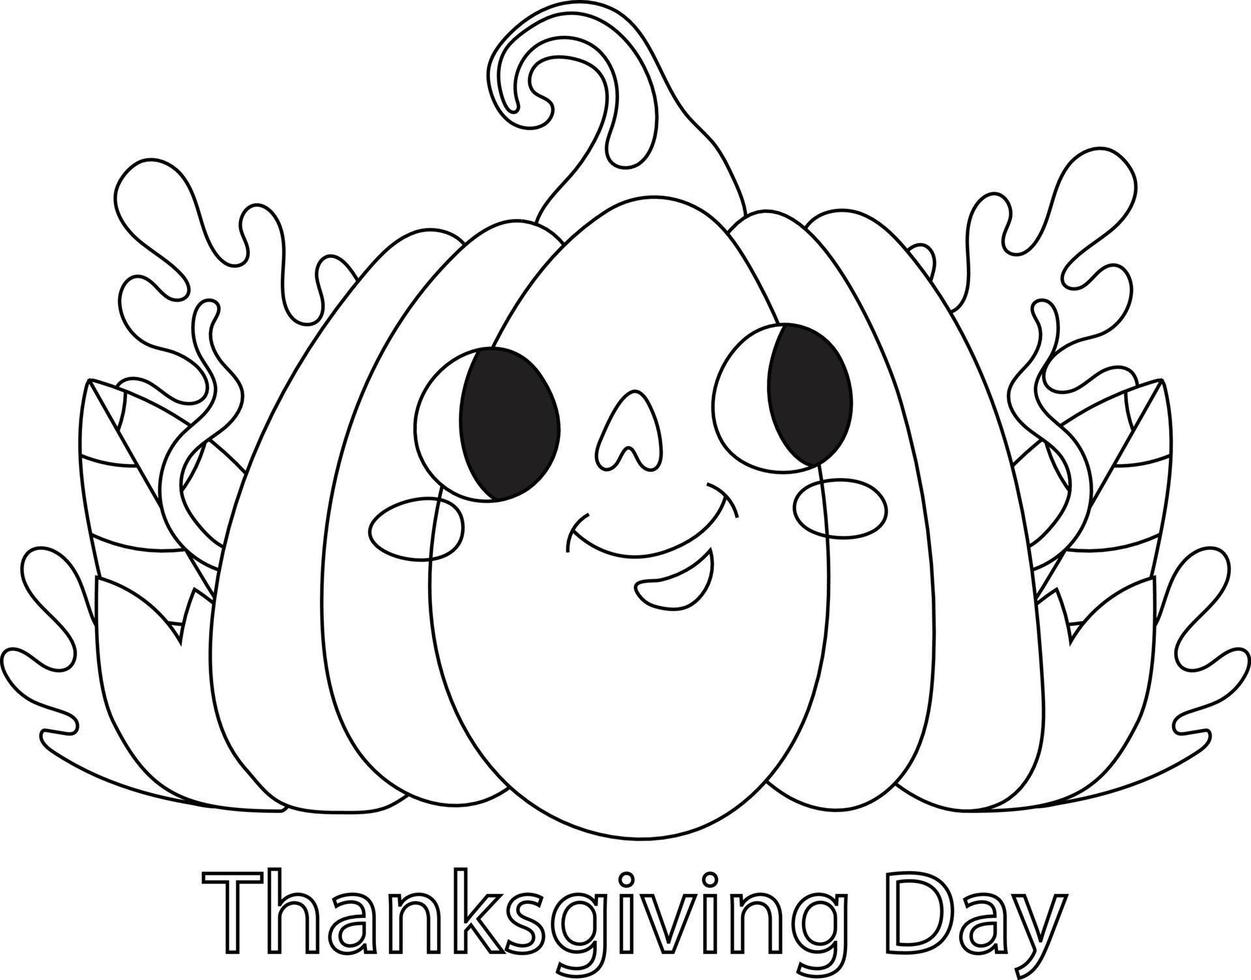 Thanksgiving Line Art And Illustrations for Coloring Page vector